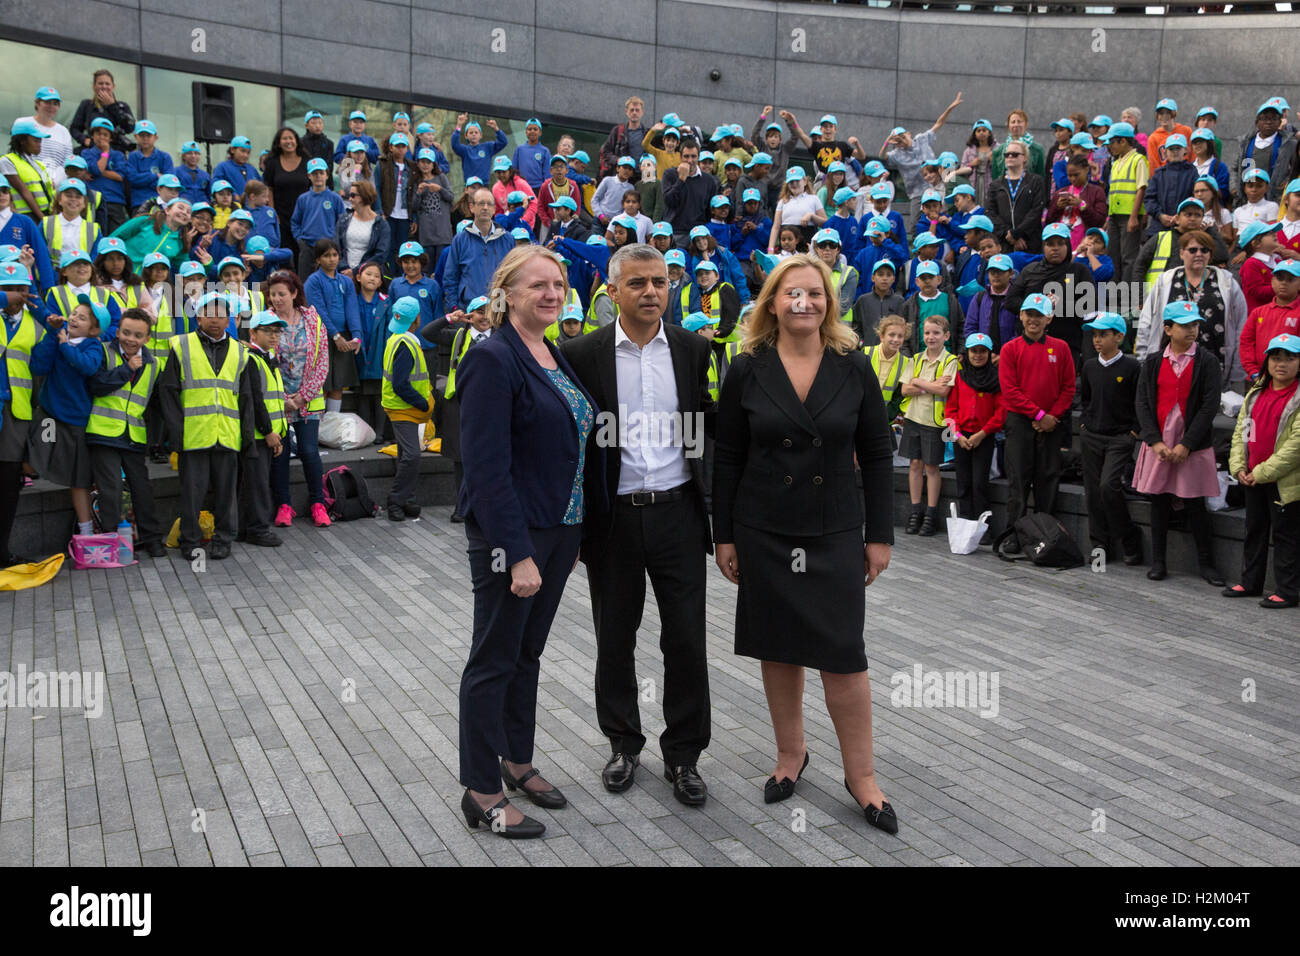 London, UK. 29th Sep, 2016. The Mayor of London, Sadiq Khan, launches the new London Curriculum for primary schools at the London Curriculum Festival at the Scoop, accompanied by Joanne McCartney, Deputy Mayor for Education, and Yelena Baturina, founder of the Be Open Foundation. Credit:  Mark Kerrison/Alamy Live News Stock Photo